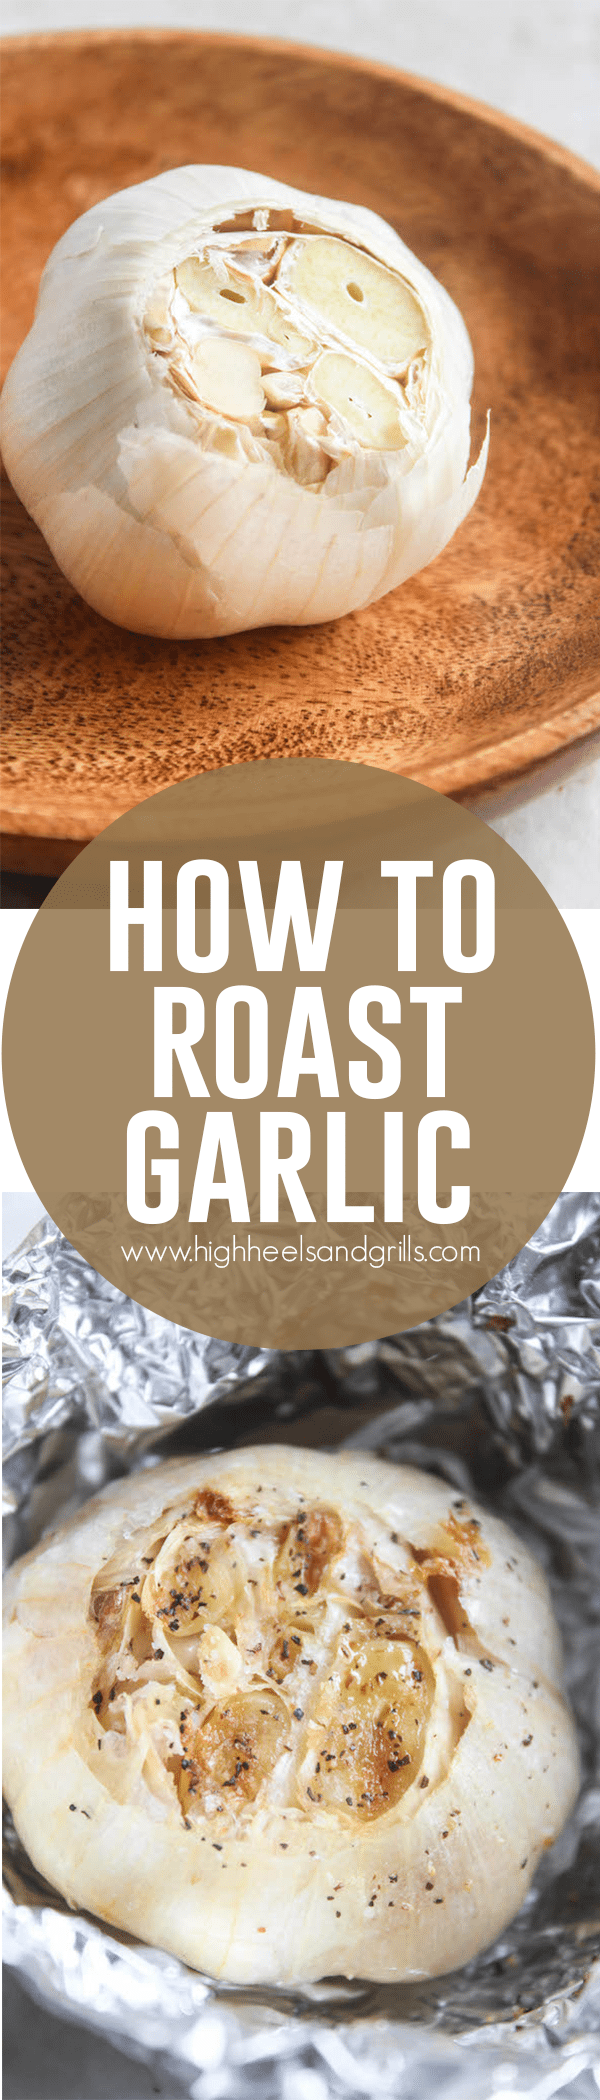 How to Roast Garlic - Everything you need to know, plus recipes you can make with it!